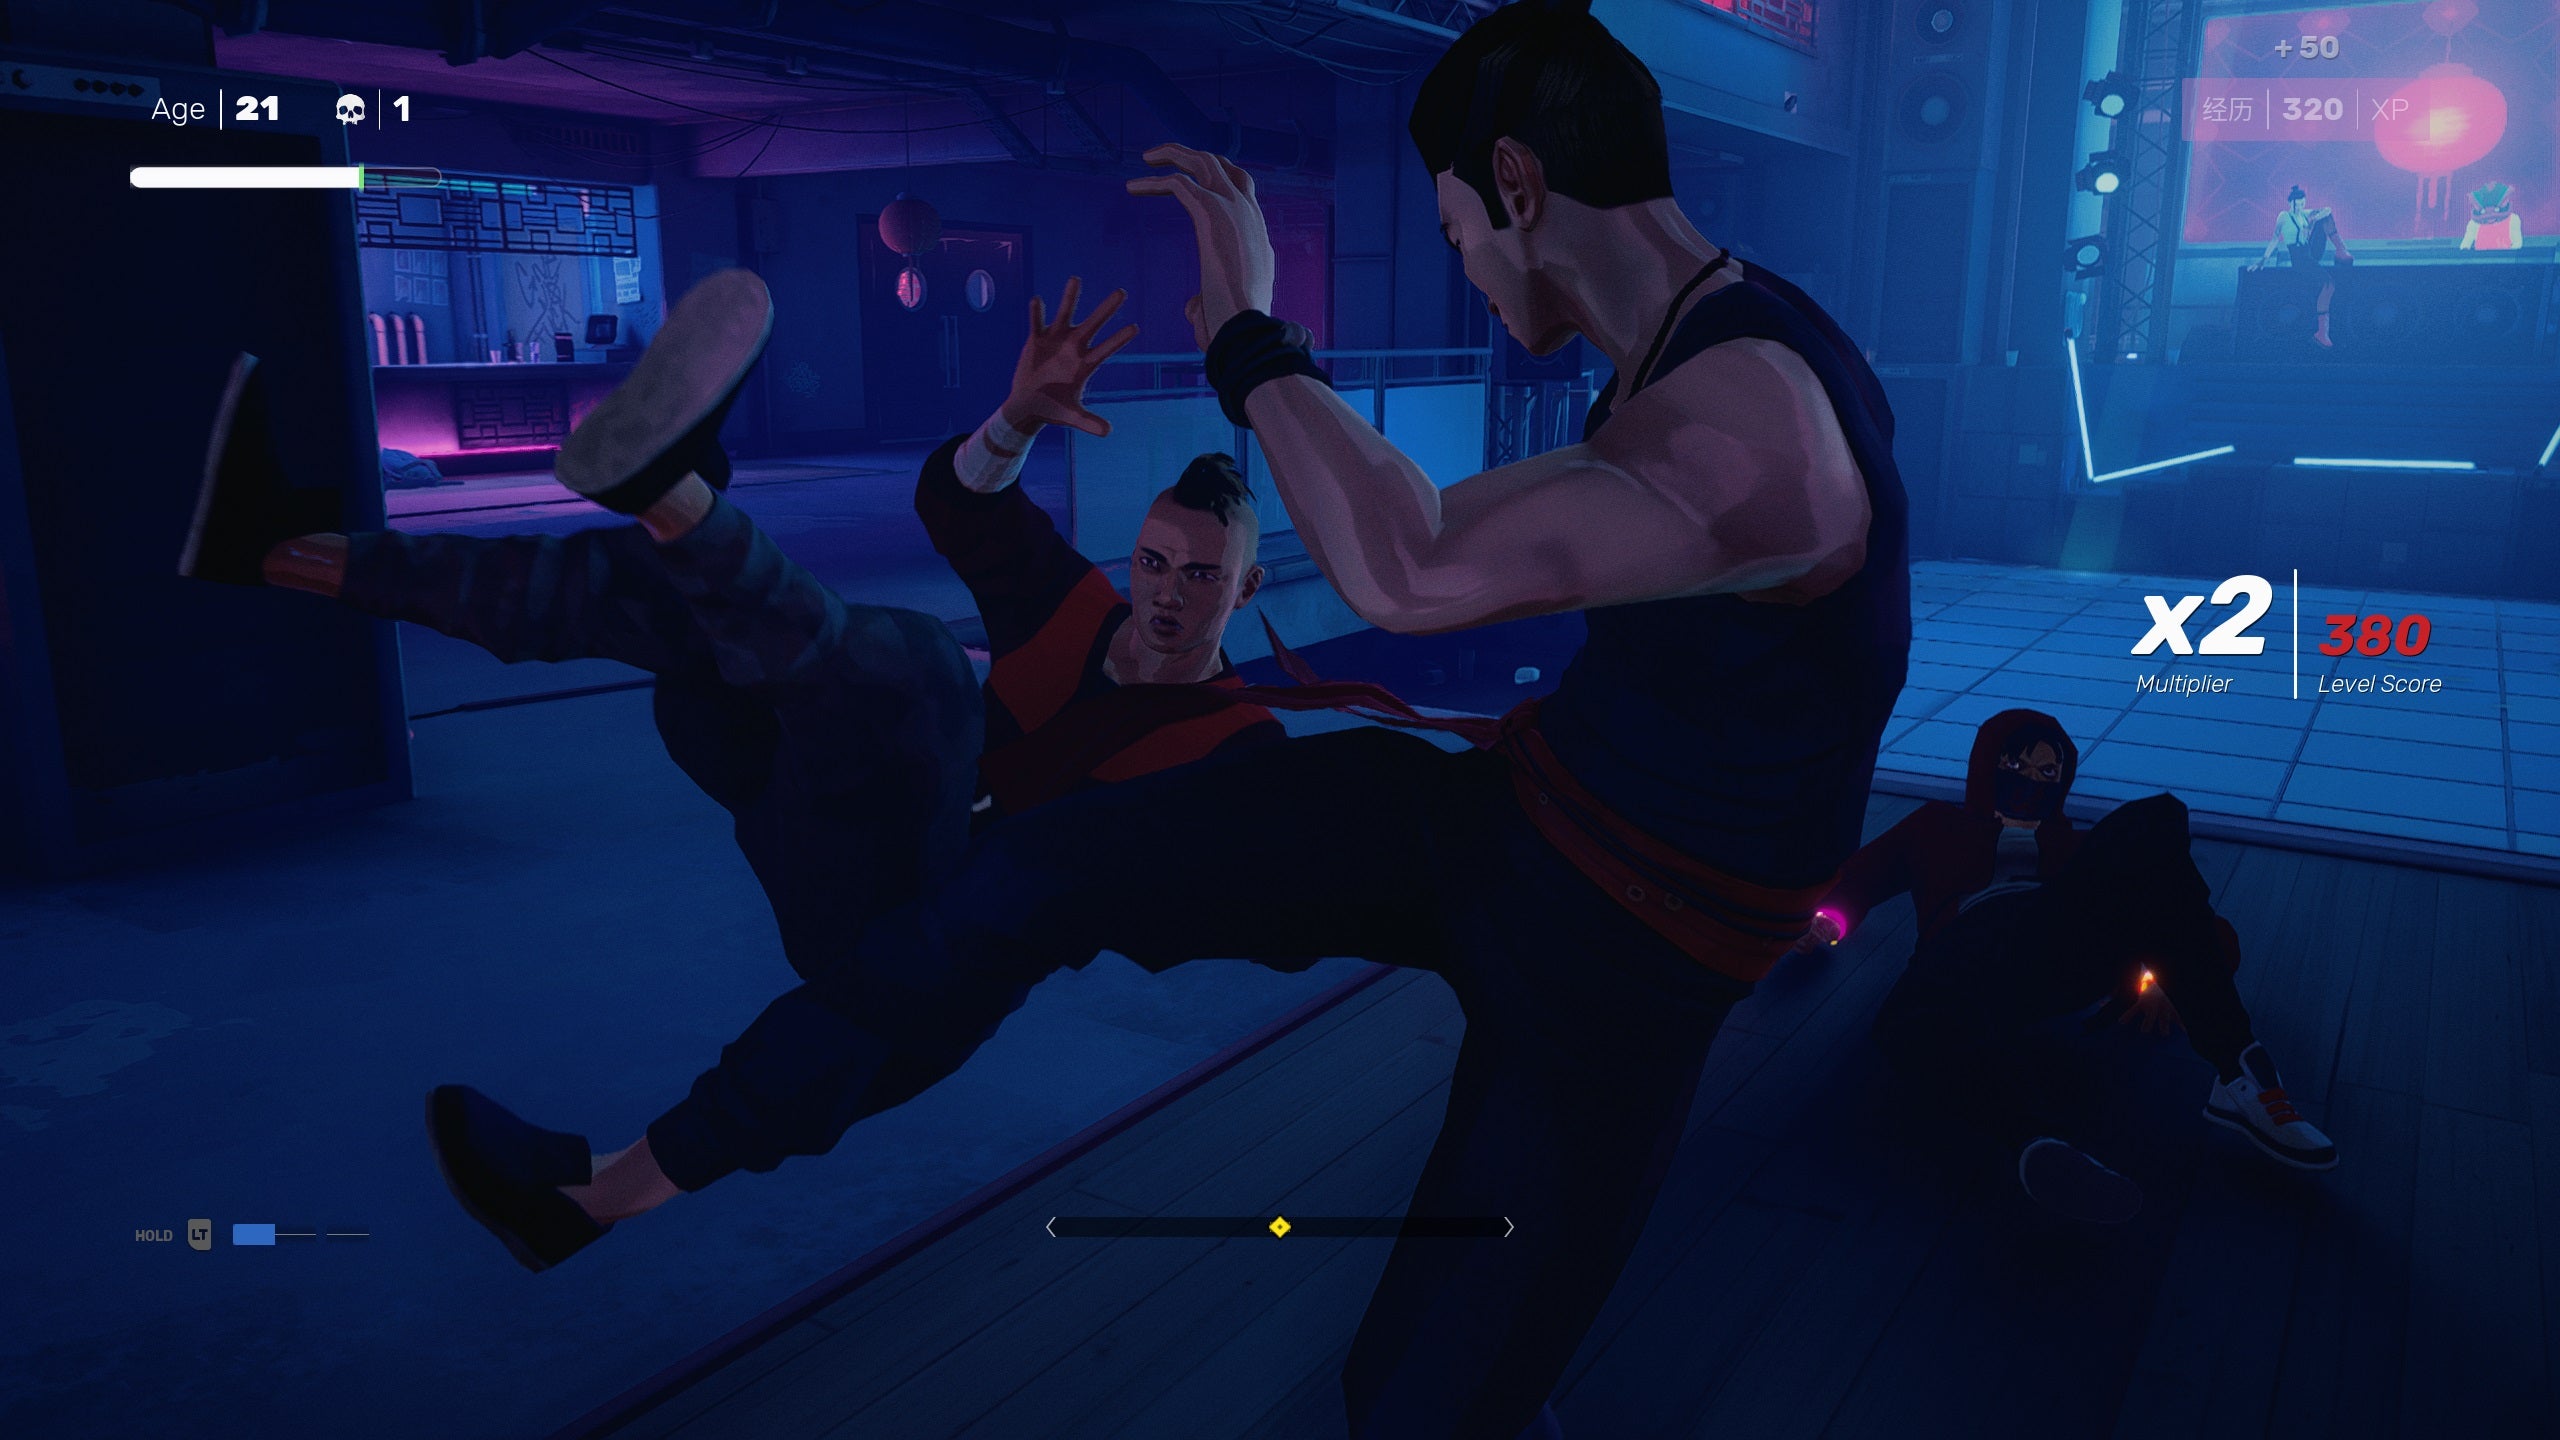 The protagonist of Sifu trips an enemy by sweeping their legs up from underneath them. It's in a darkened room with blue backlighting, and looks really cool